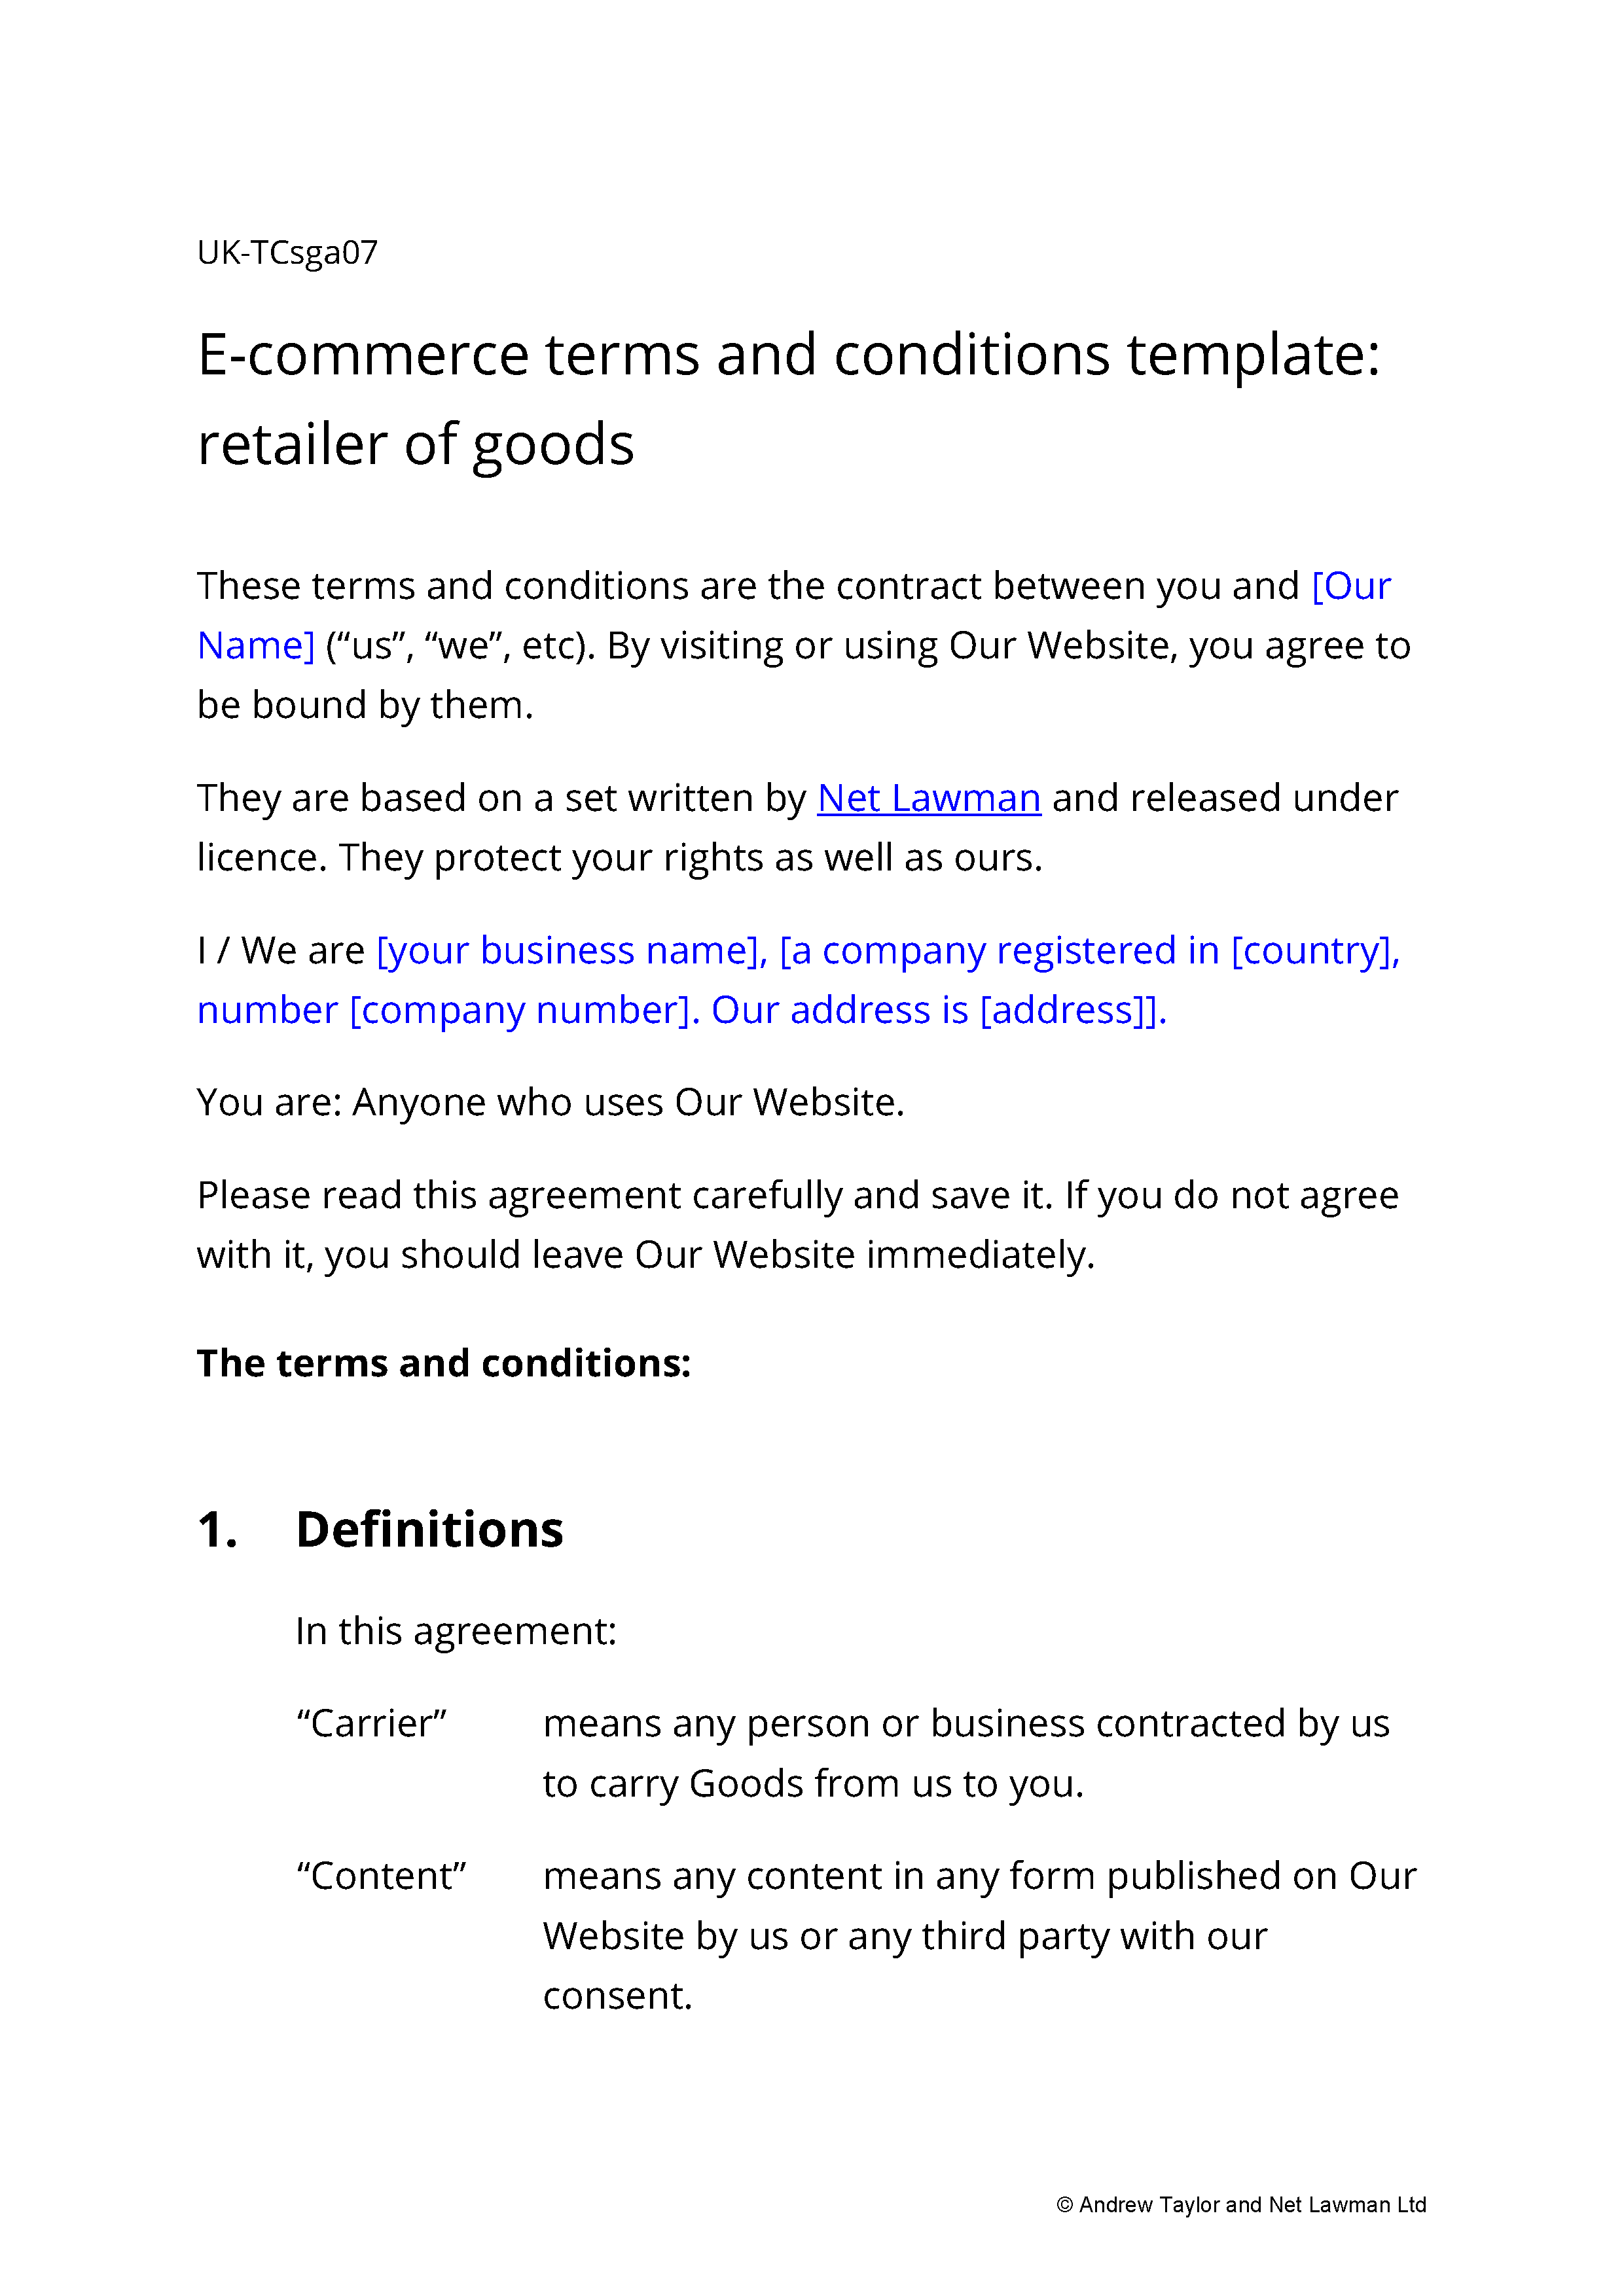 Sample page from the e-commerce website terms